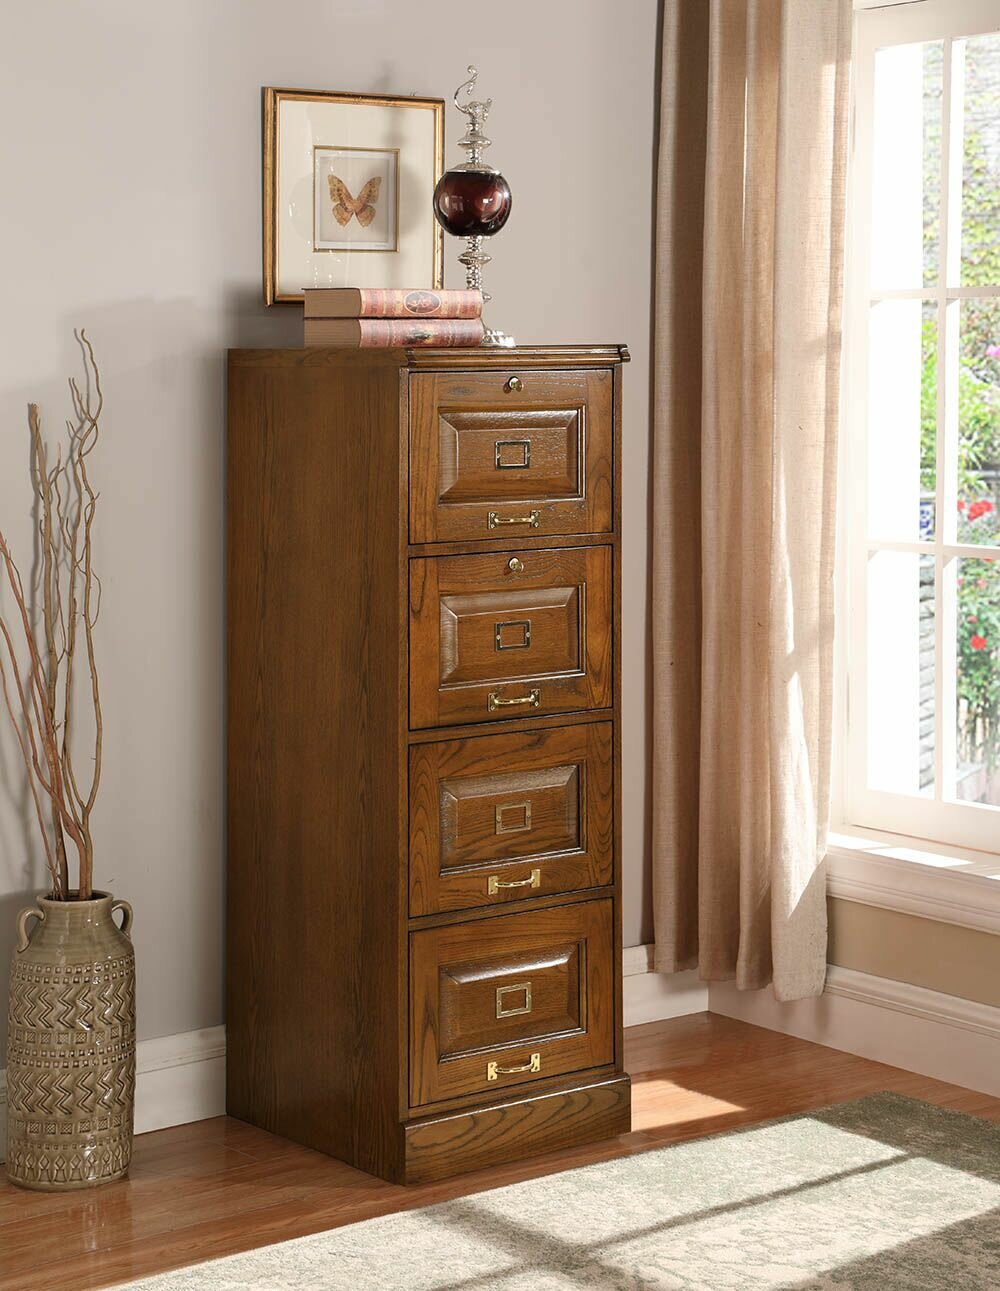 Darby Home Co Fannie 4 Drawer File Cabinet Reviews Wayfair